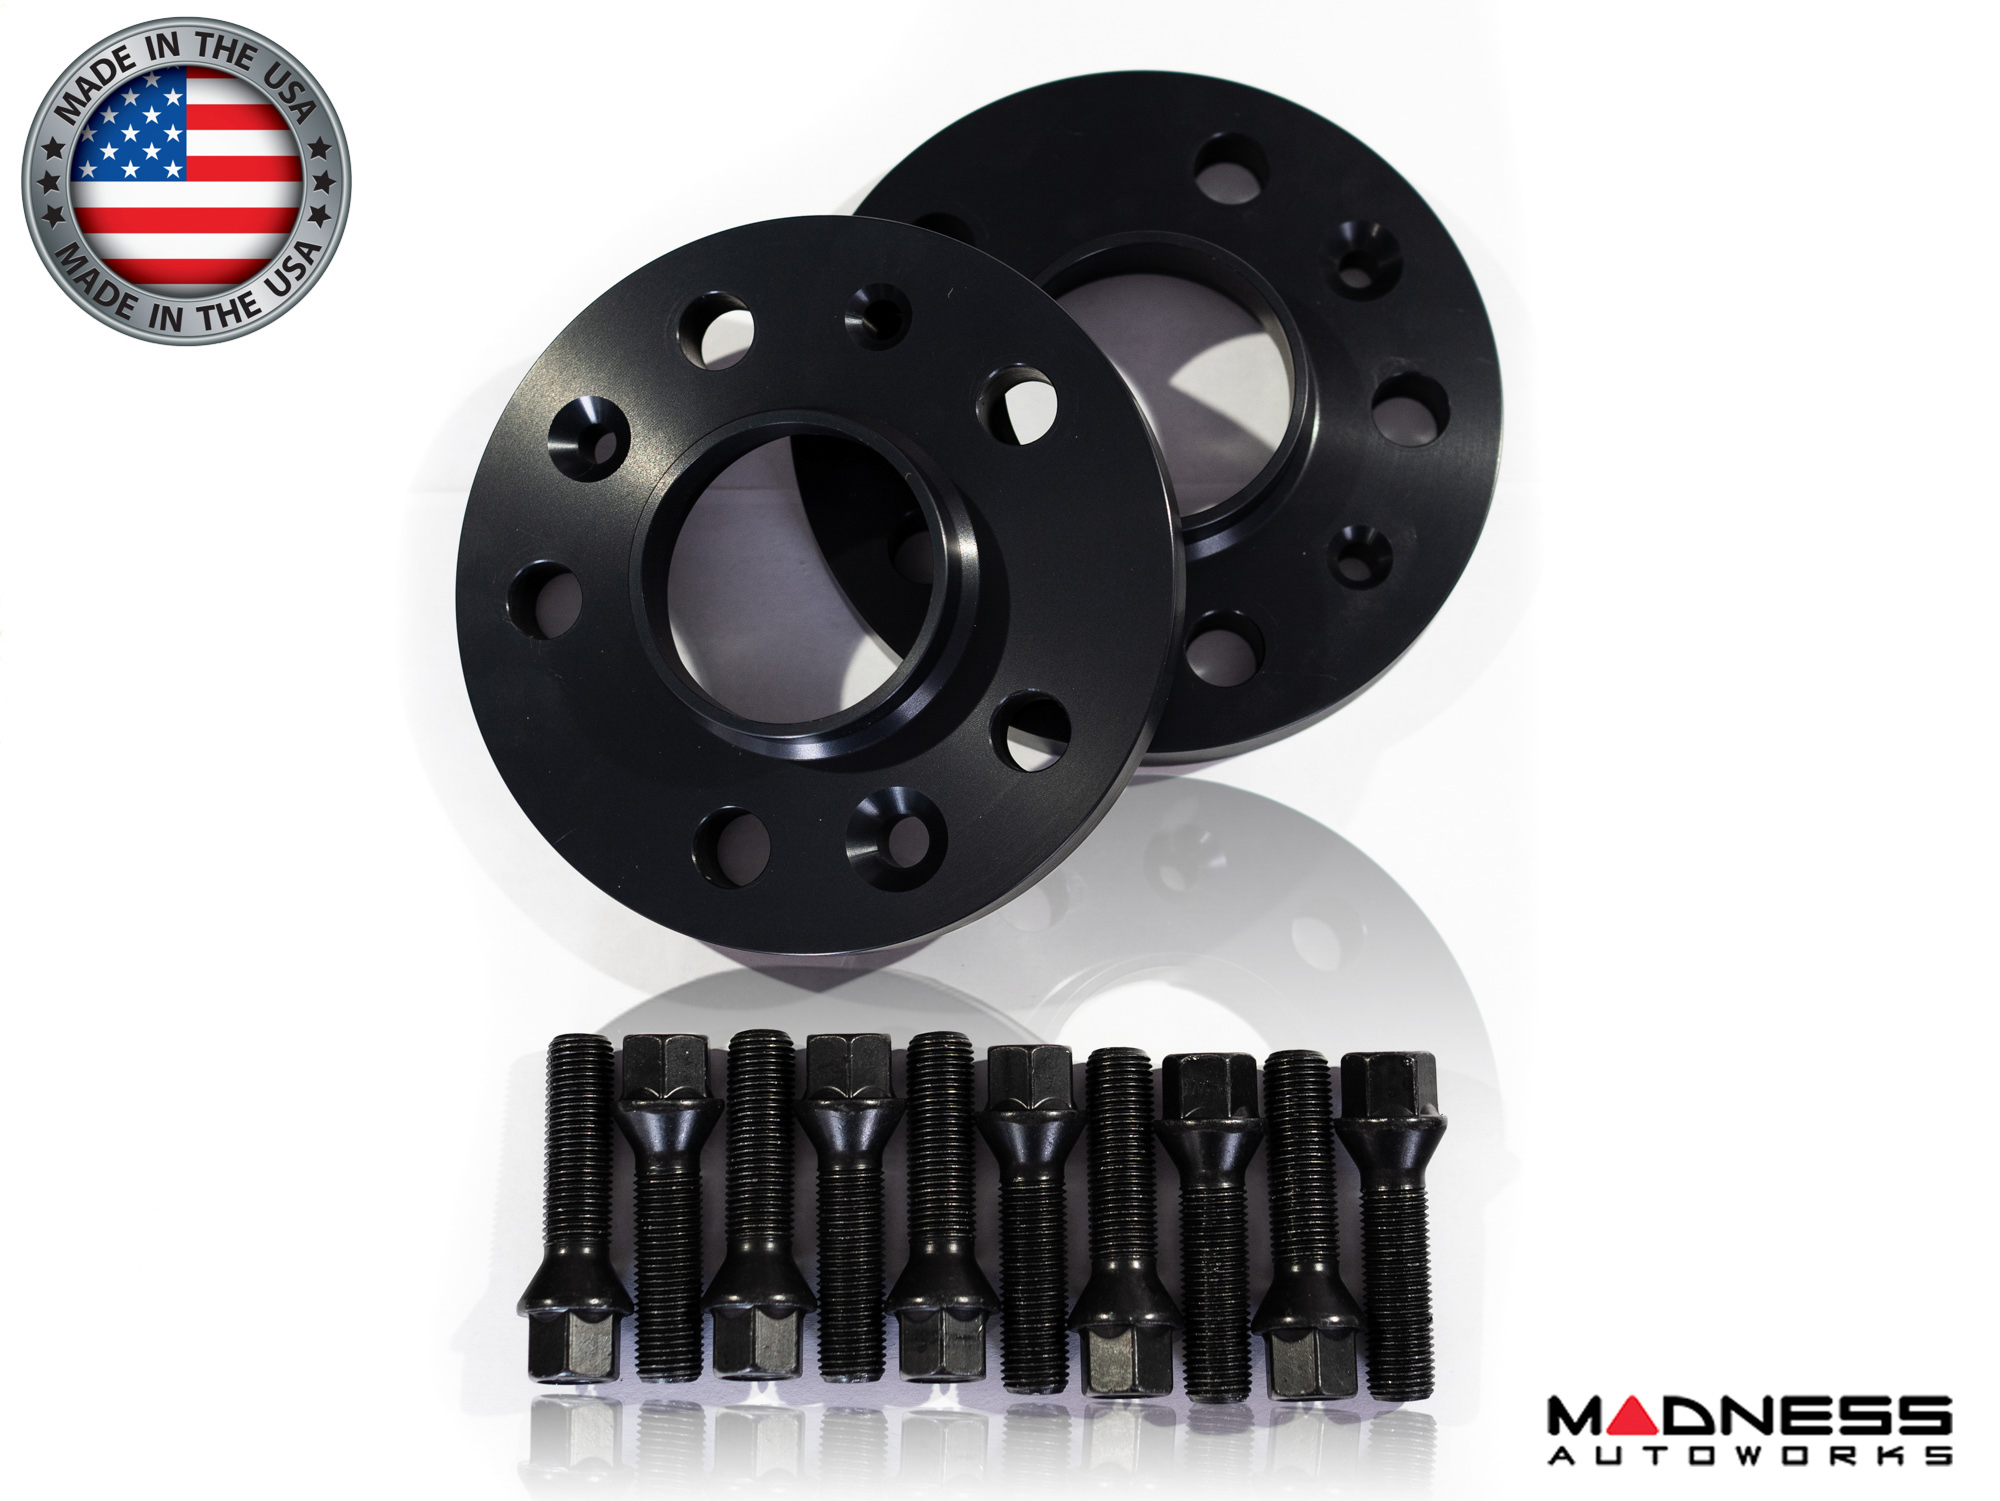 Maserati Grecale Wheel Spacers - MADNESS - 20mm - set of 2 w/ extended bolts